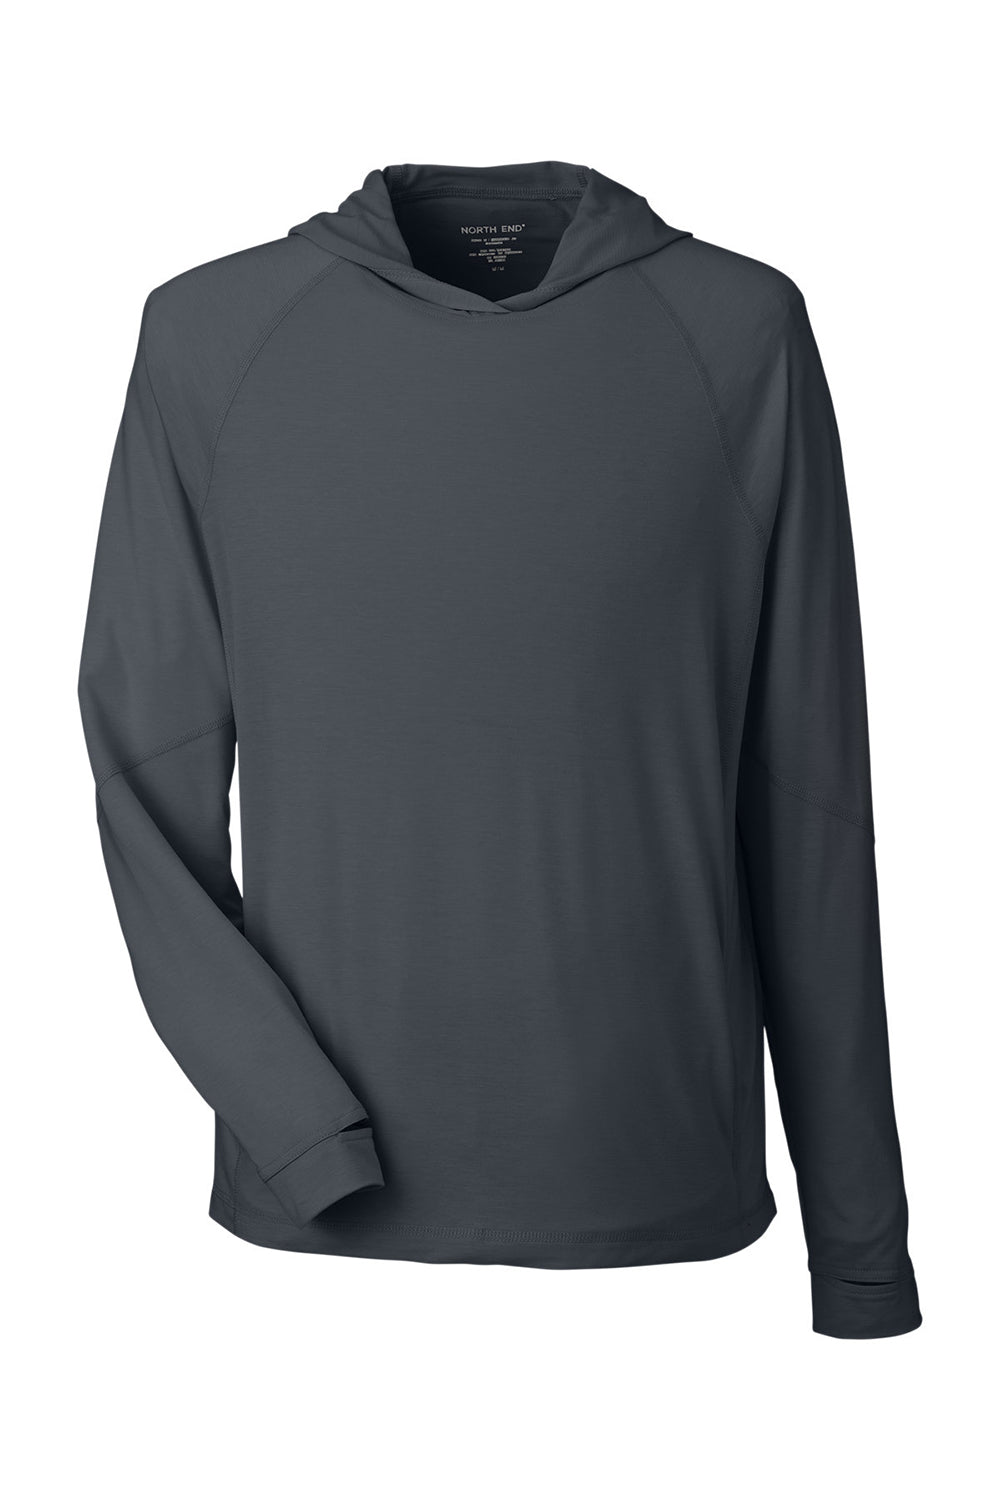 North End NE105 Mens Jaq Stretch Performance Hooded T-Shirt Hoodie Carbon Grey Flat Front